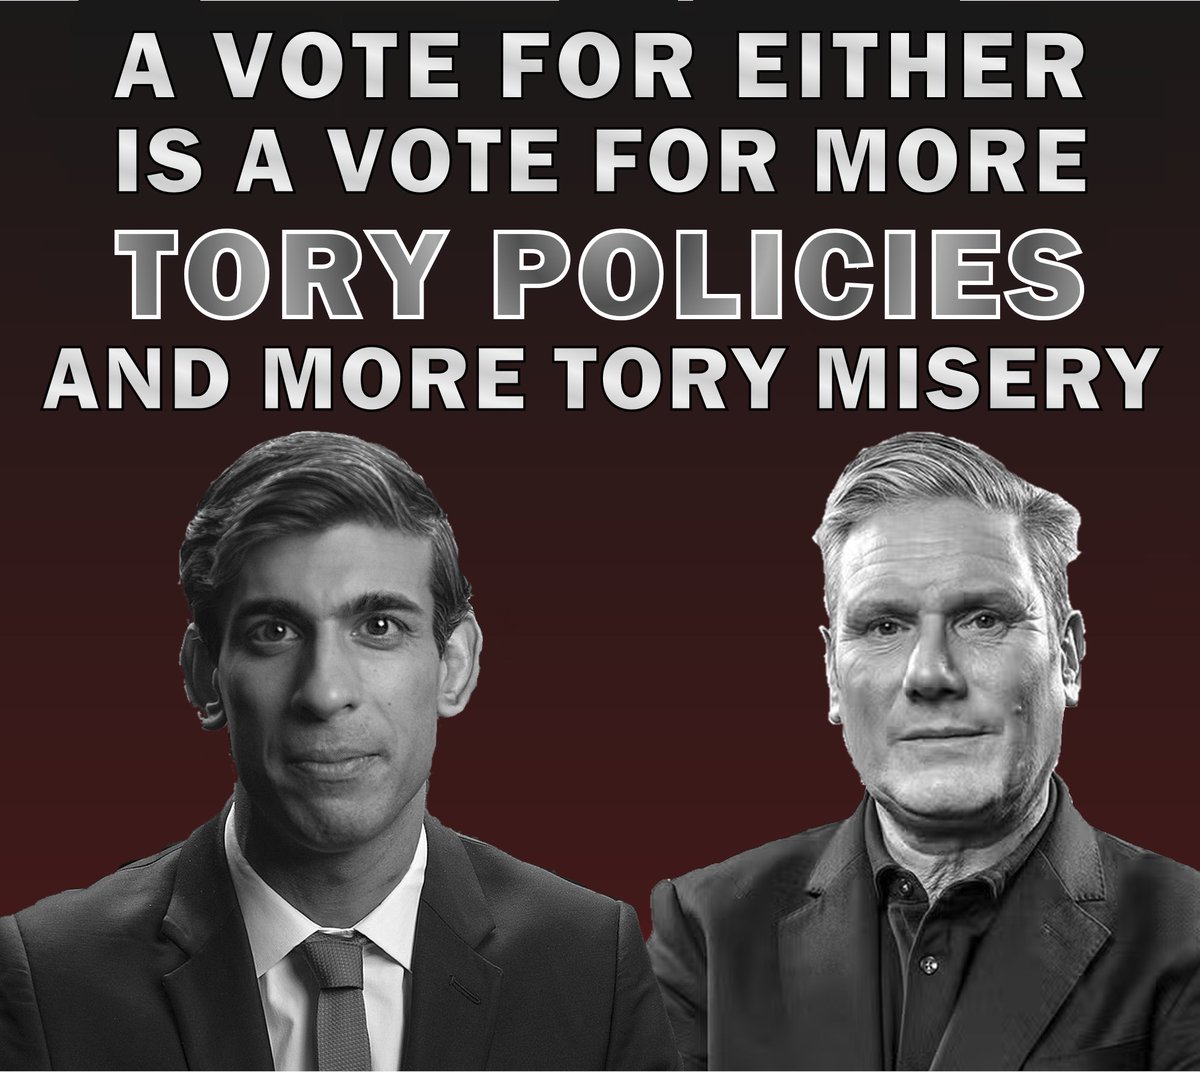 The only difference now between Tory and Labour is the colour of the badge

The policies are the same, the racism/hate are the same and a vote for either is a vote to continue austerity.

If you want change, you need to look elsewhere